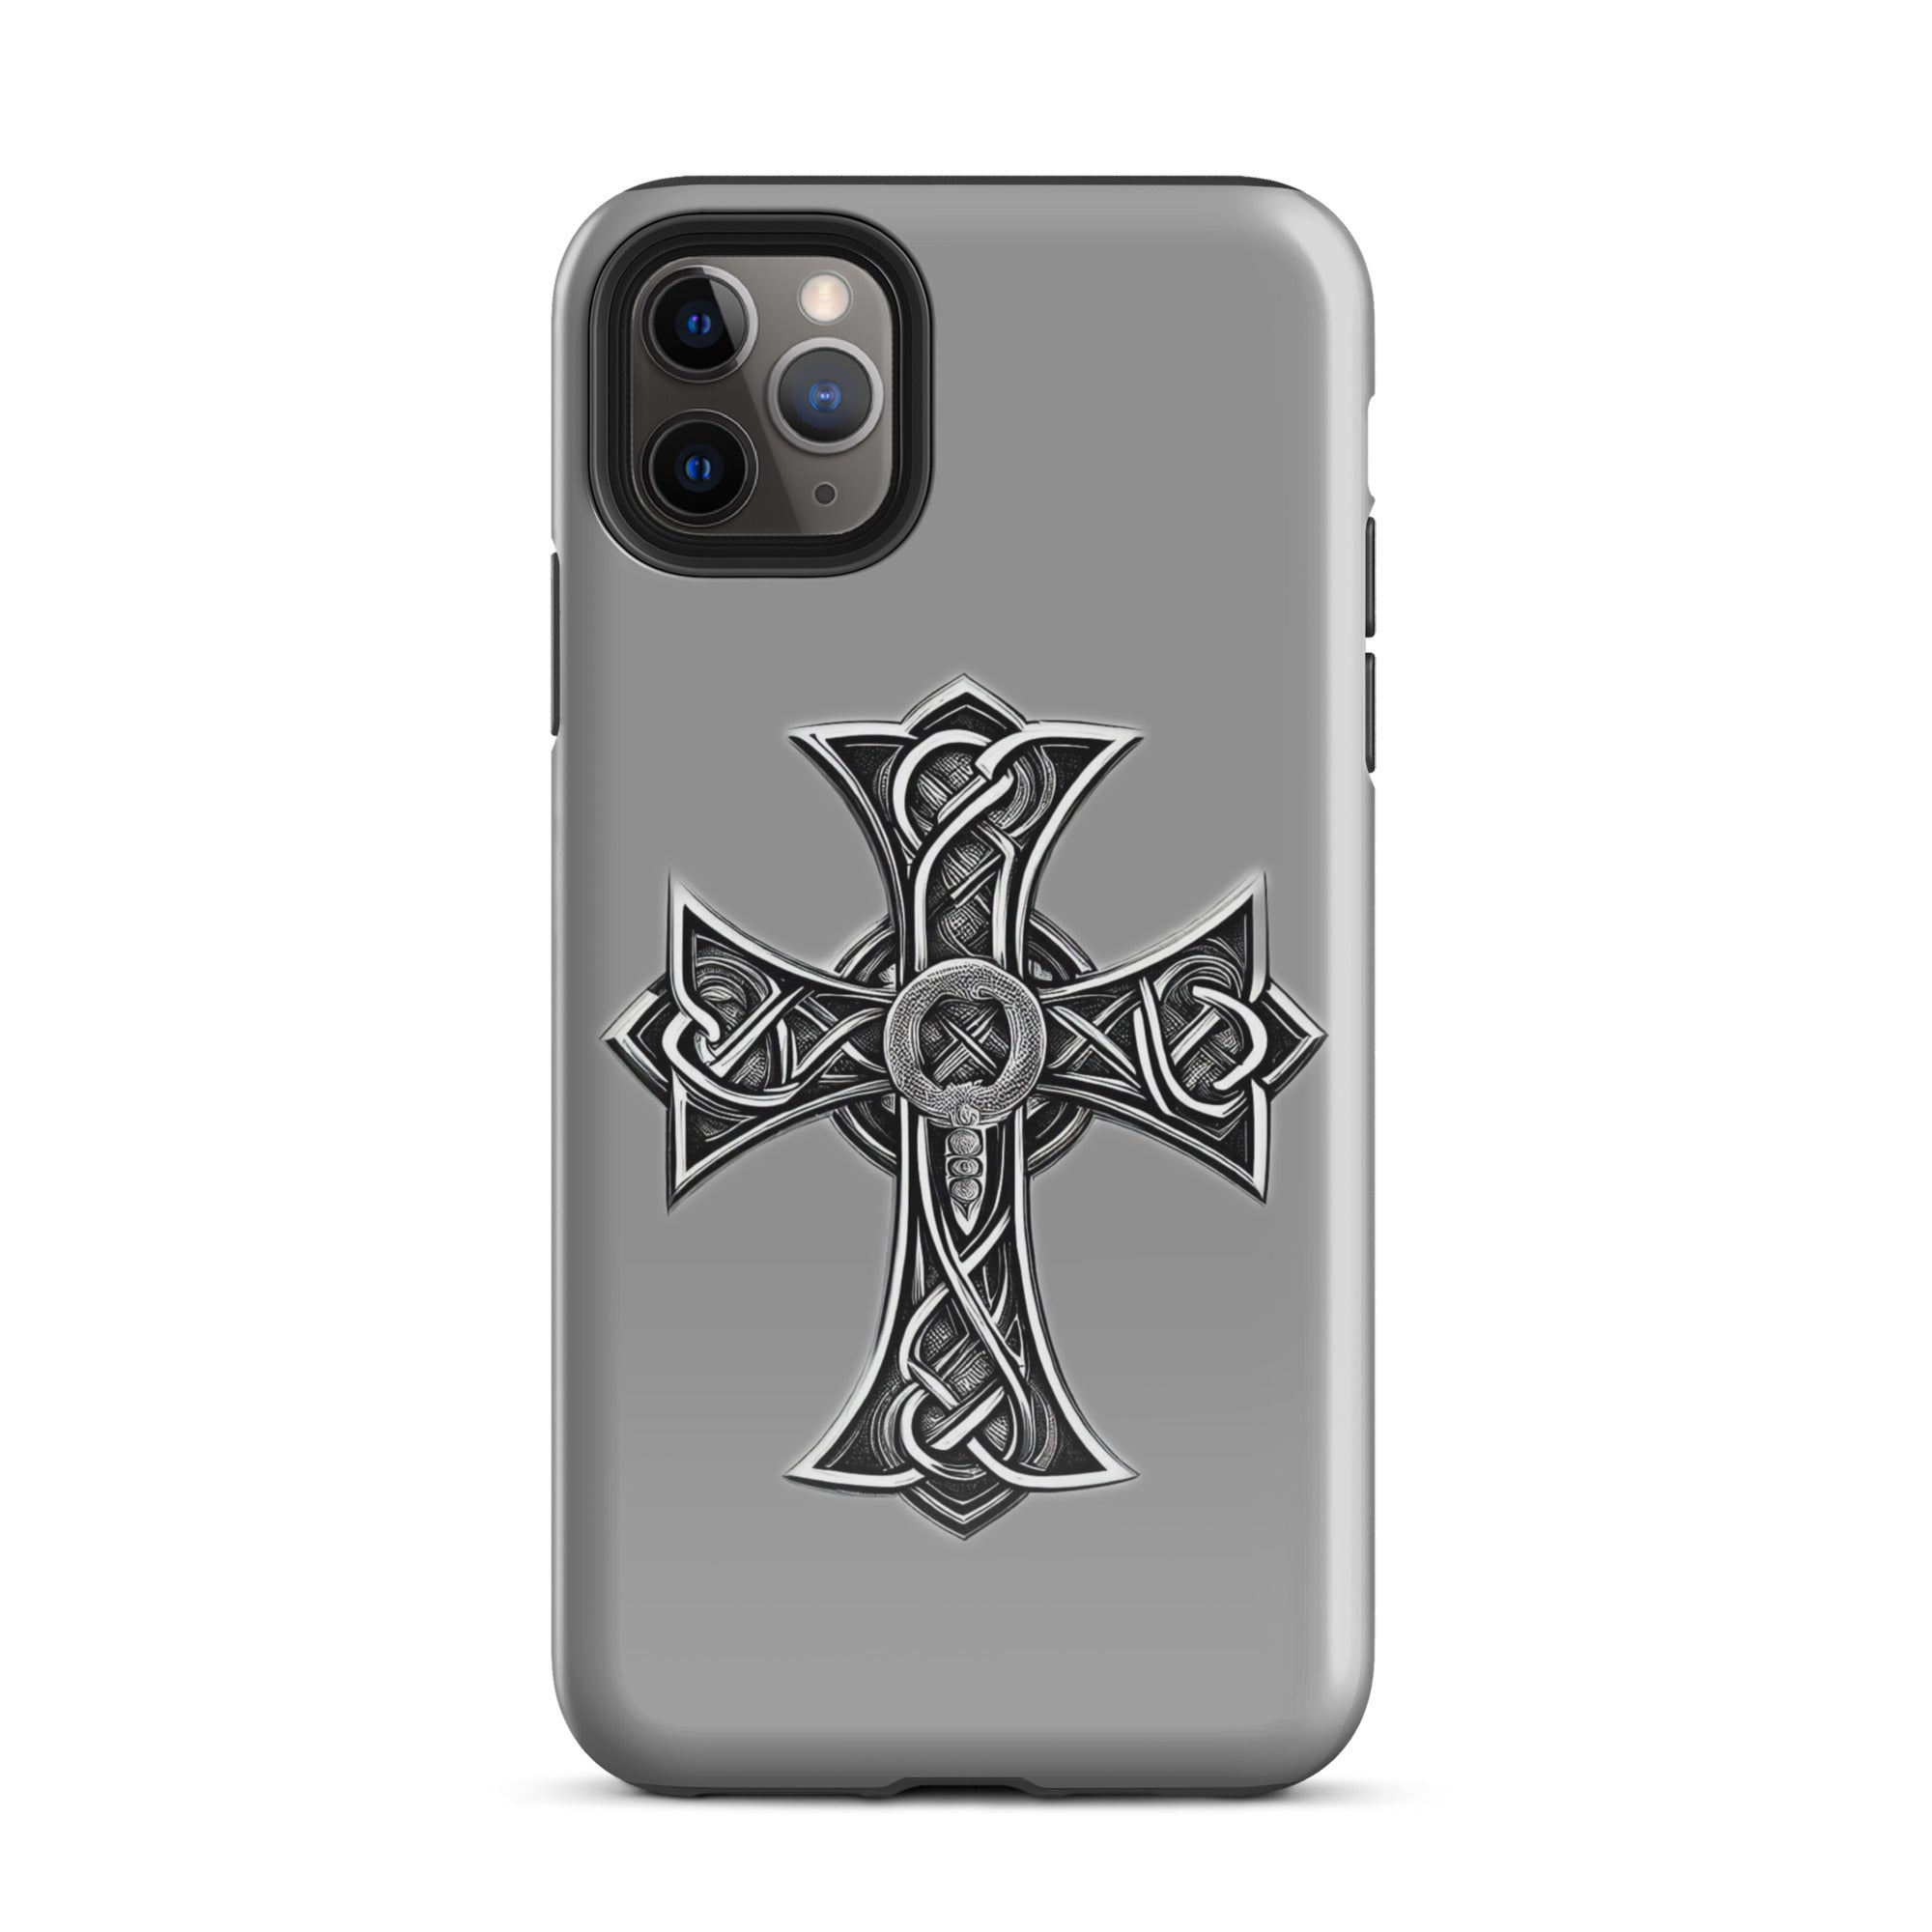 tough-case-for-iphone-glossy-iphone-11-pro-max-front-6563847713db9.jpg